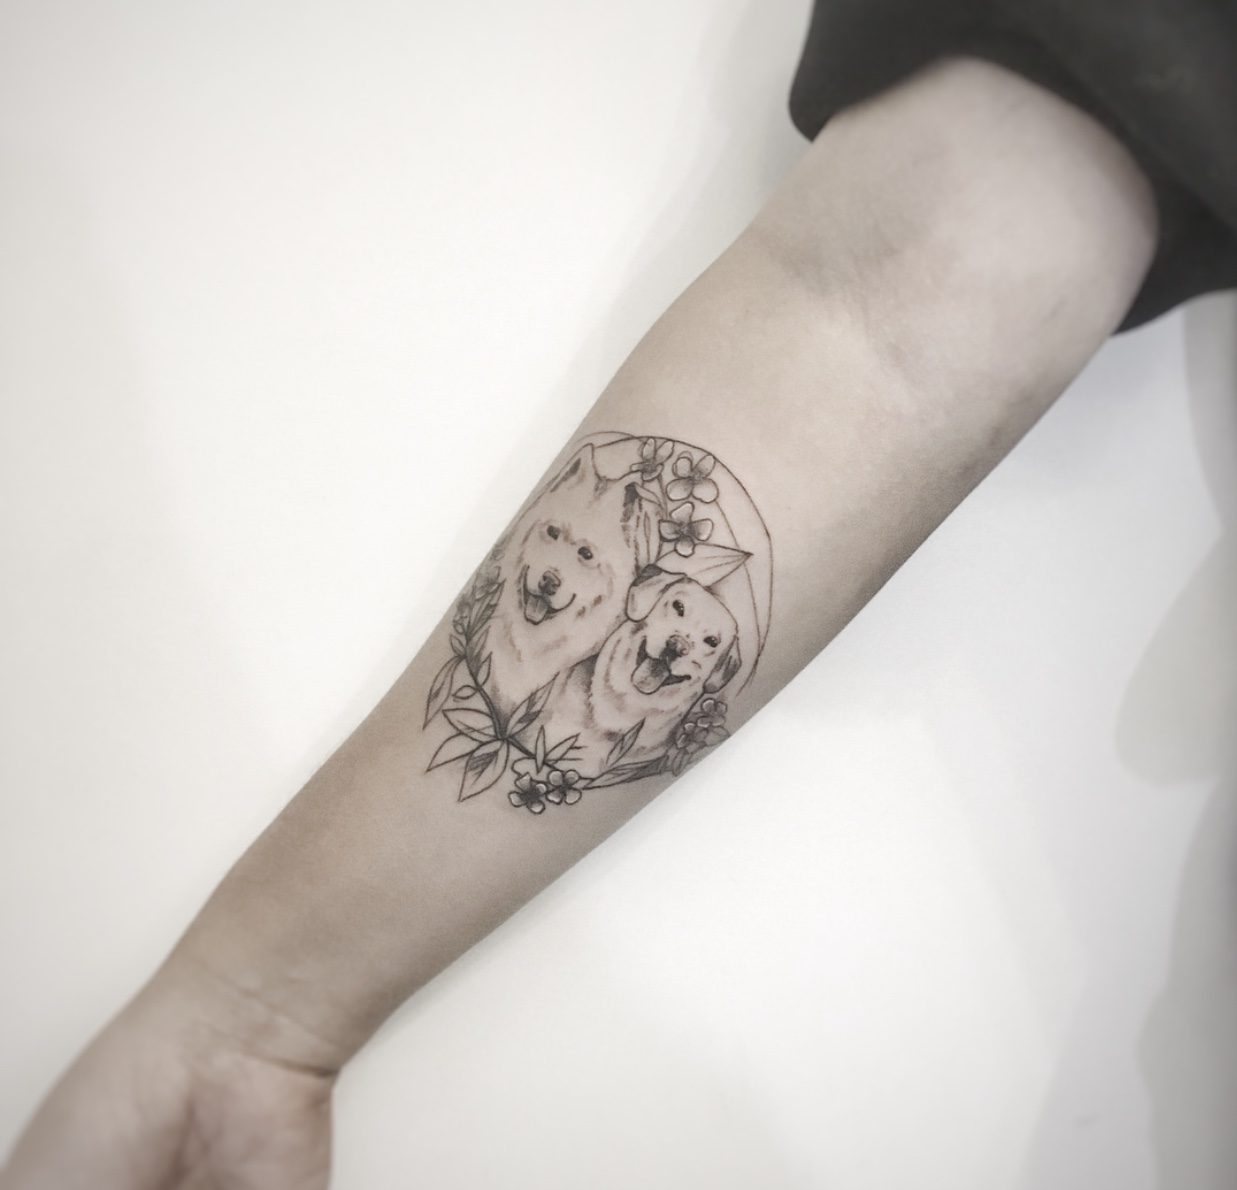 minimalist Labrador Retriever and another dog inside a floral circle tattoo on the forearm